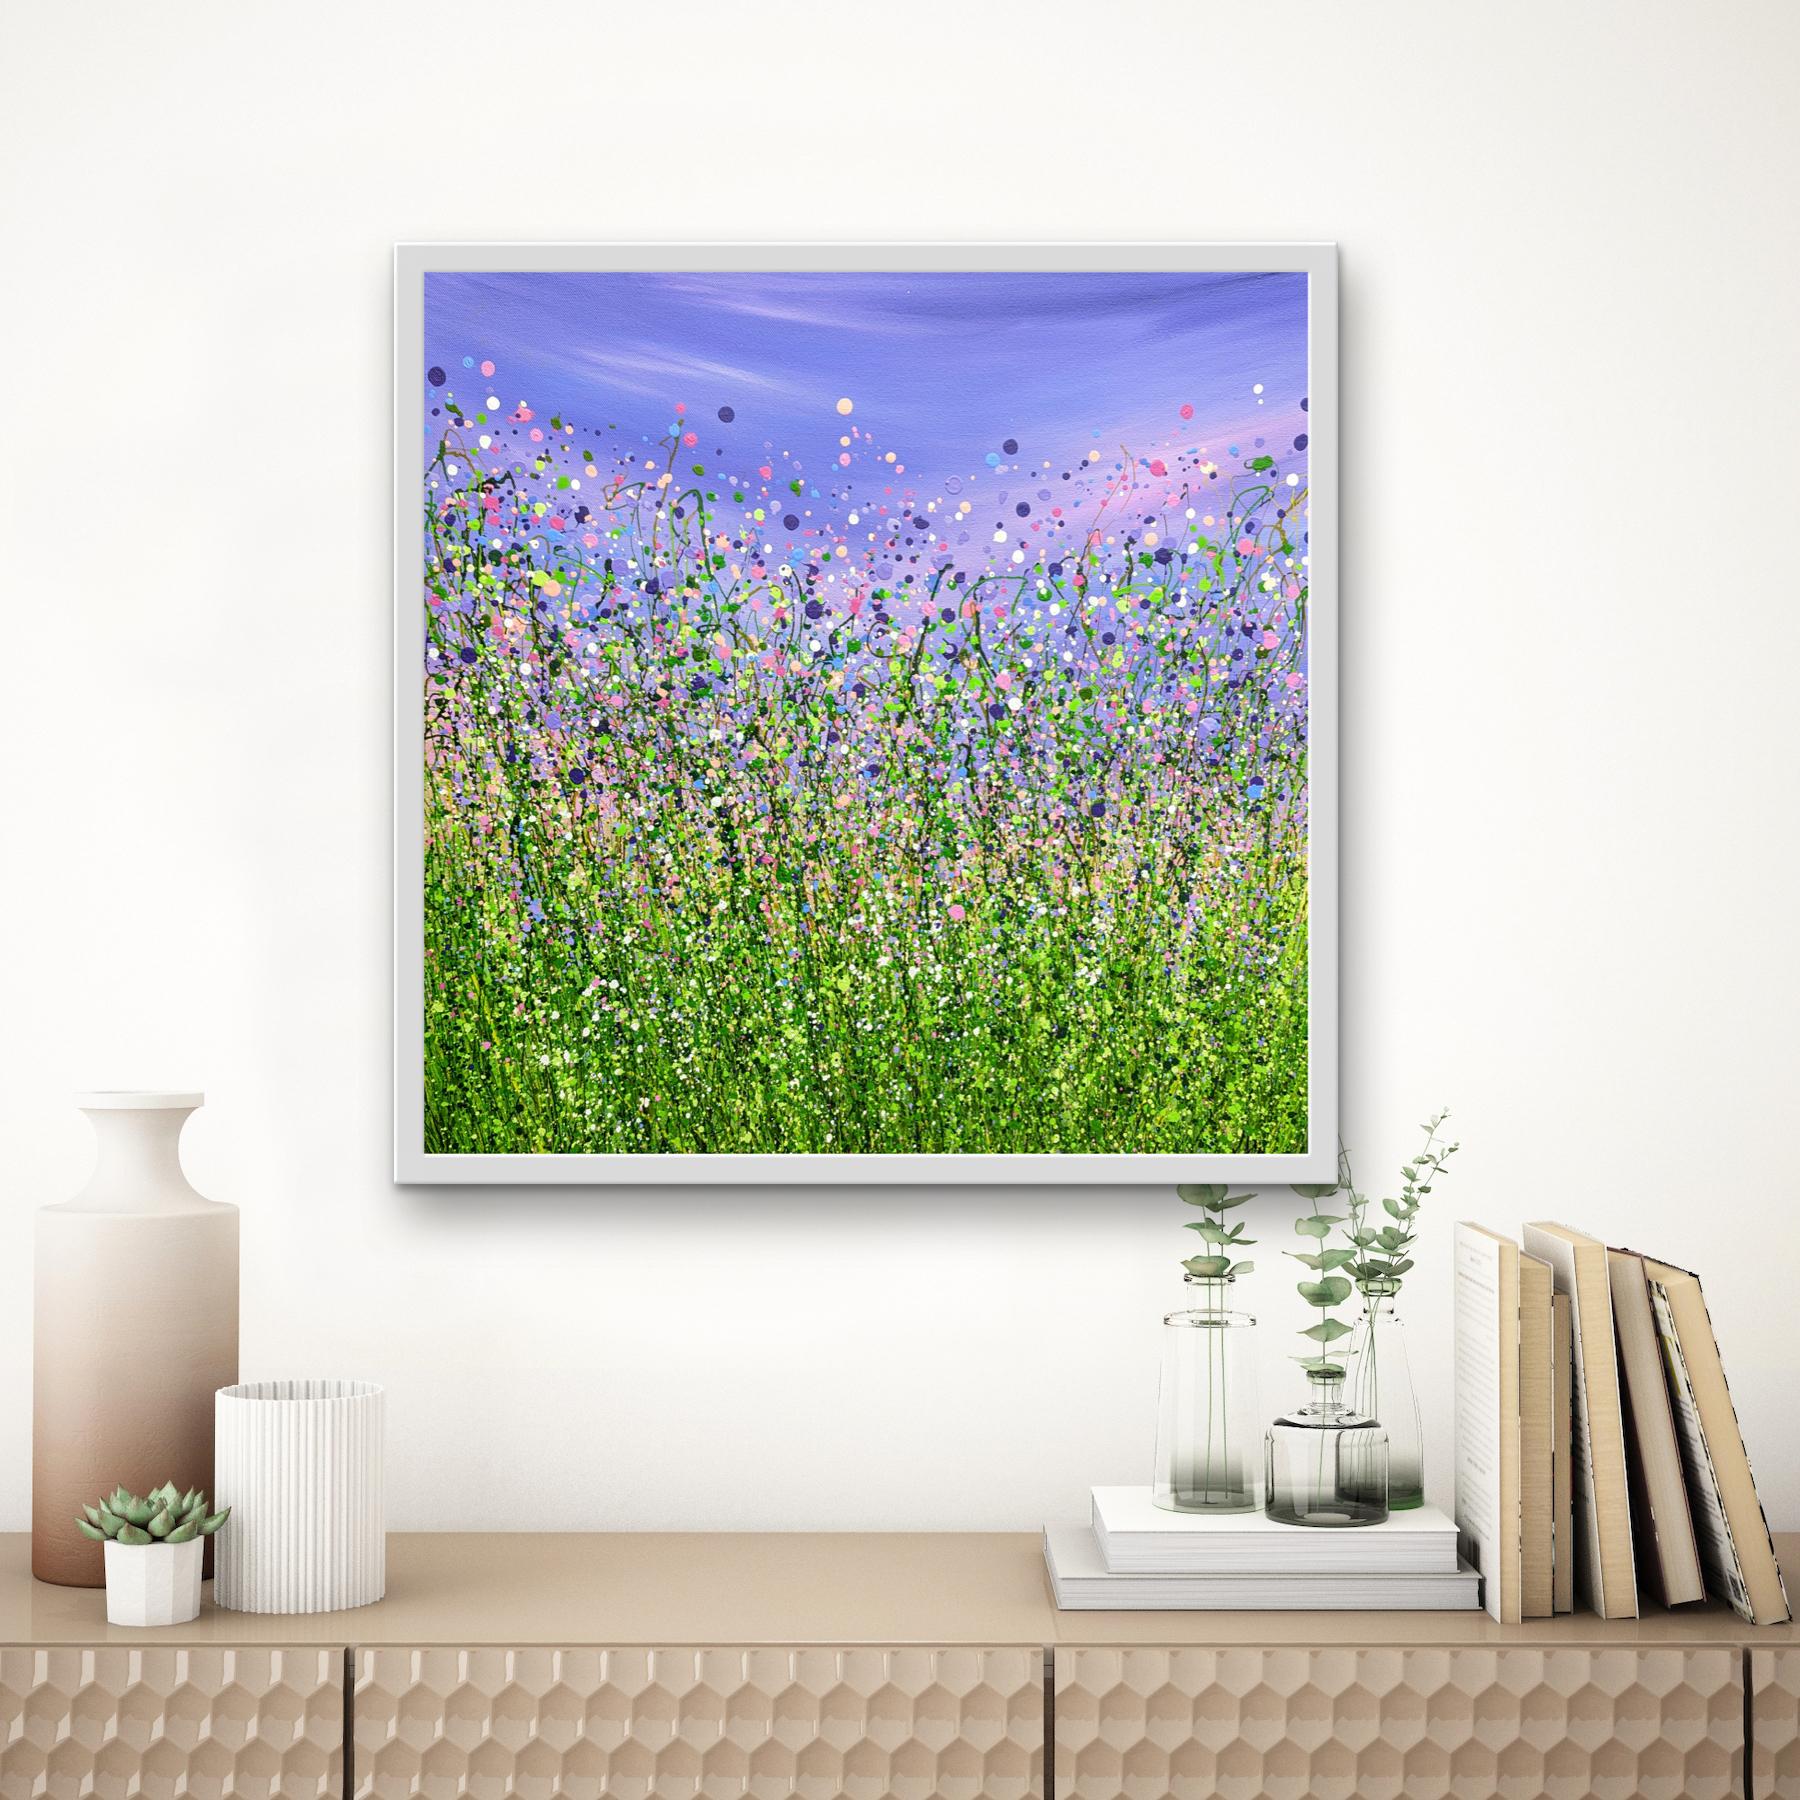 Wrapped Up In A Daydream #17, meadow art, original art, affordable art For Sale 4